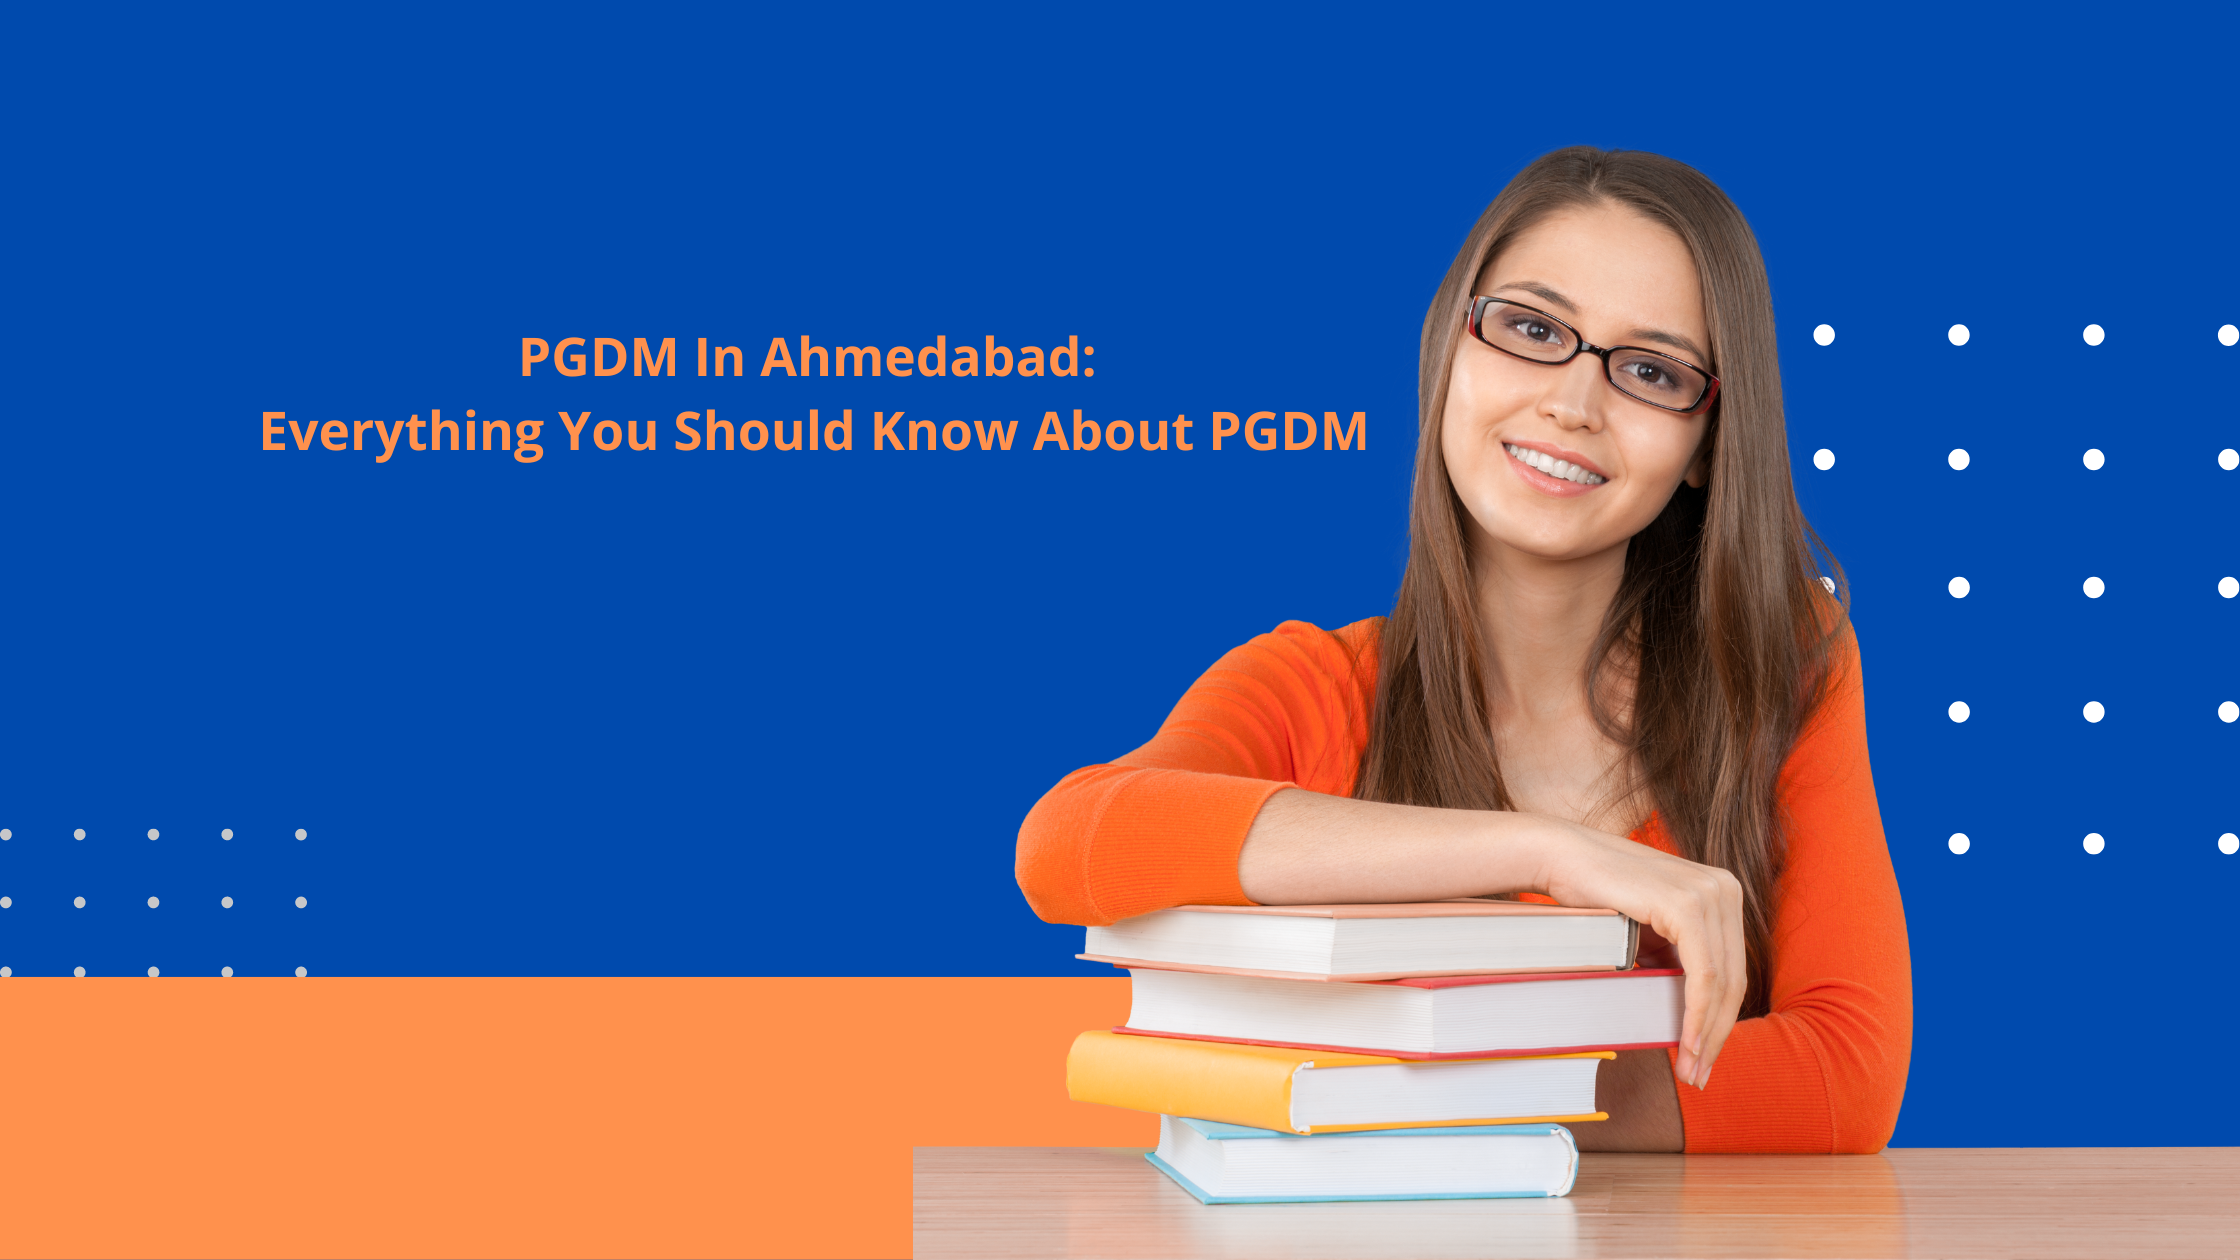 PGDM In Ahmedabad: Everything You Should Know About PGDM